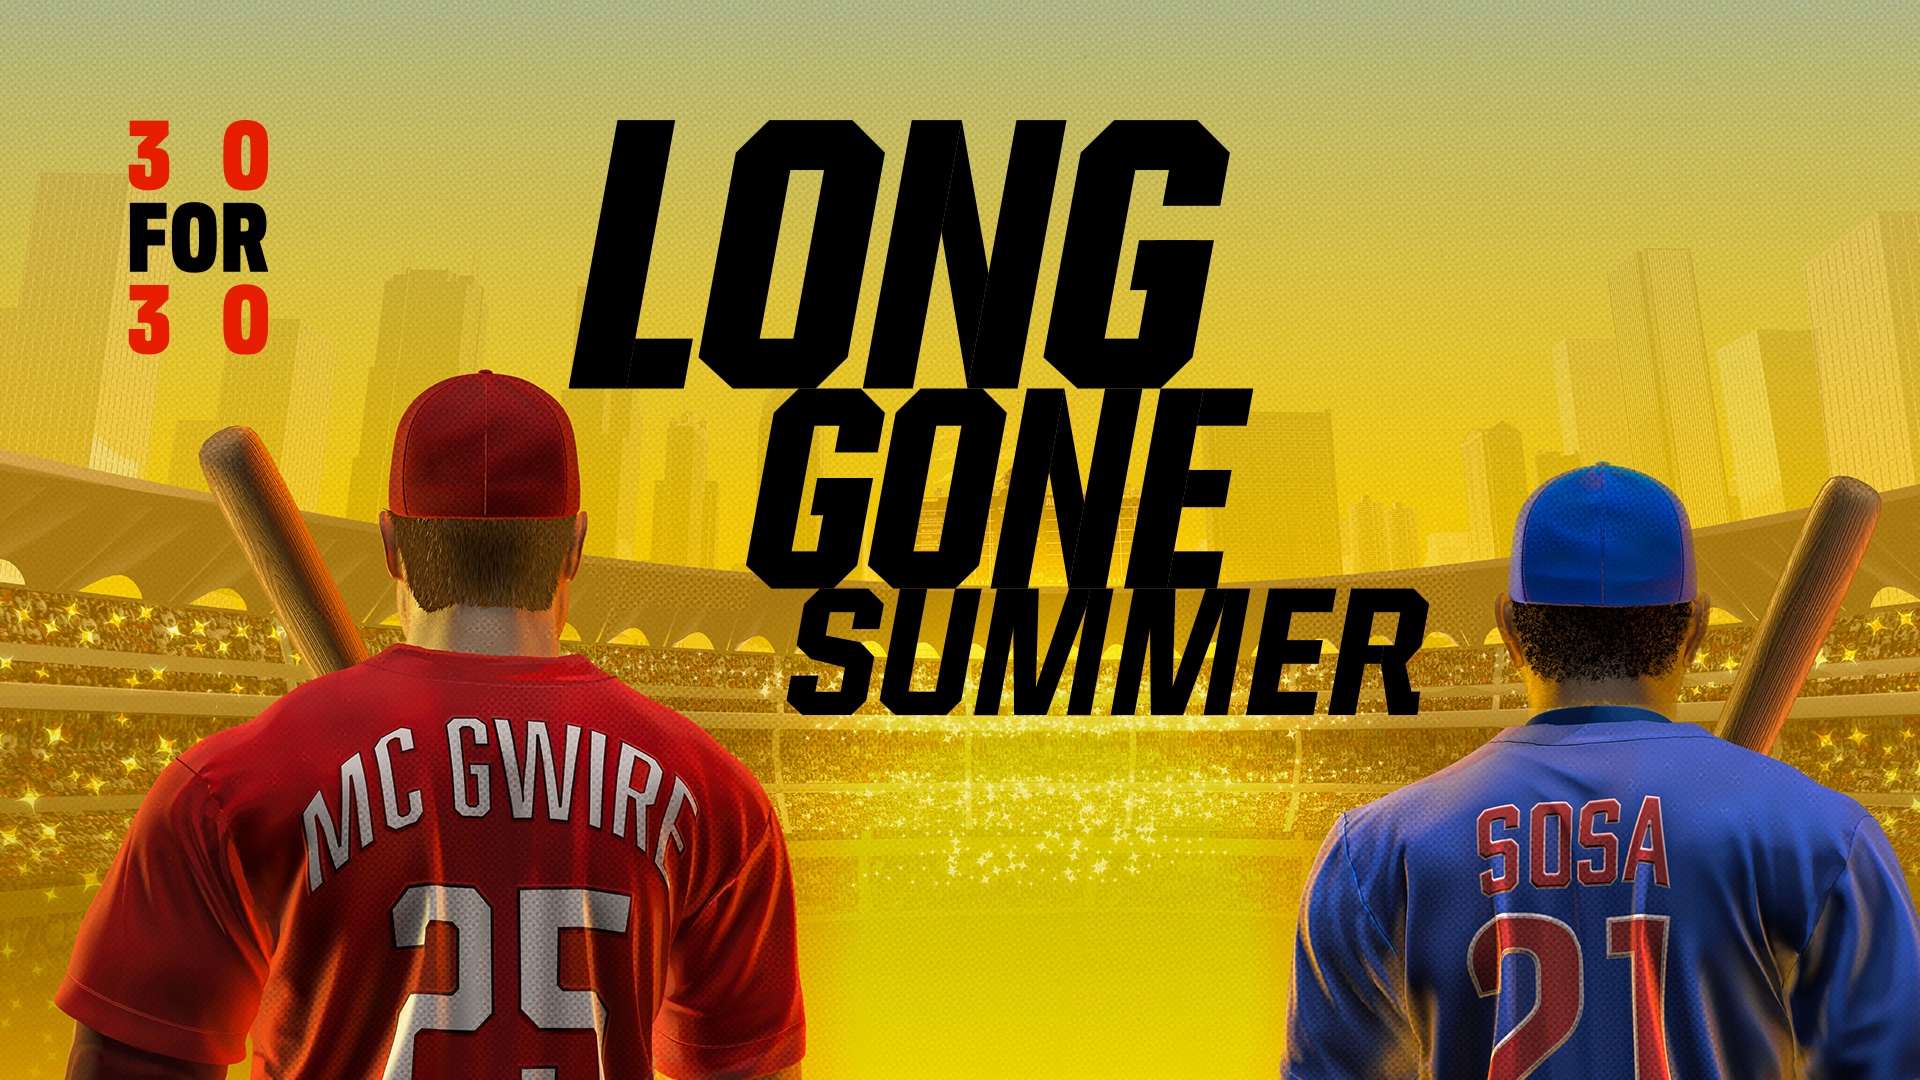 Why I won't watch Sosa and McGwire in 'Long Gone Summer